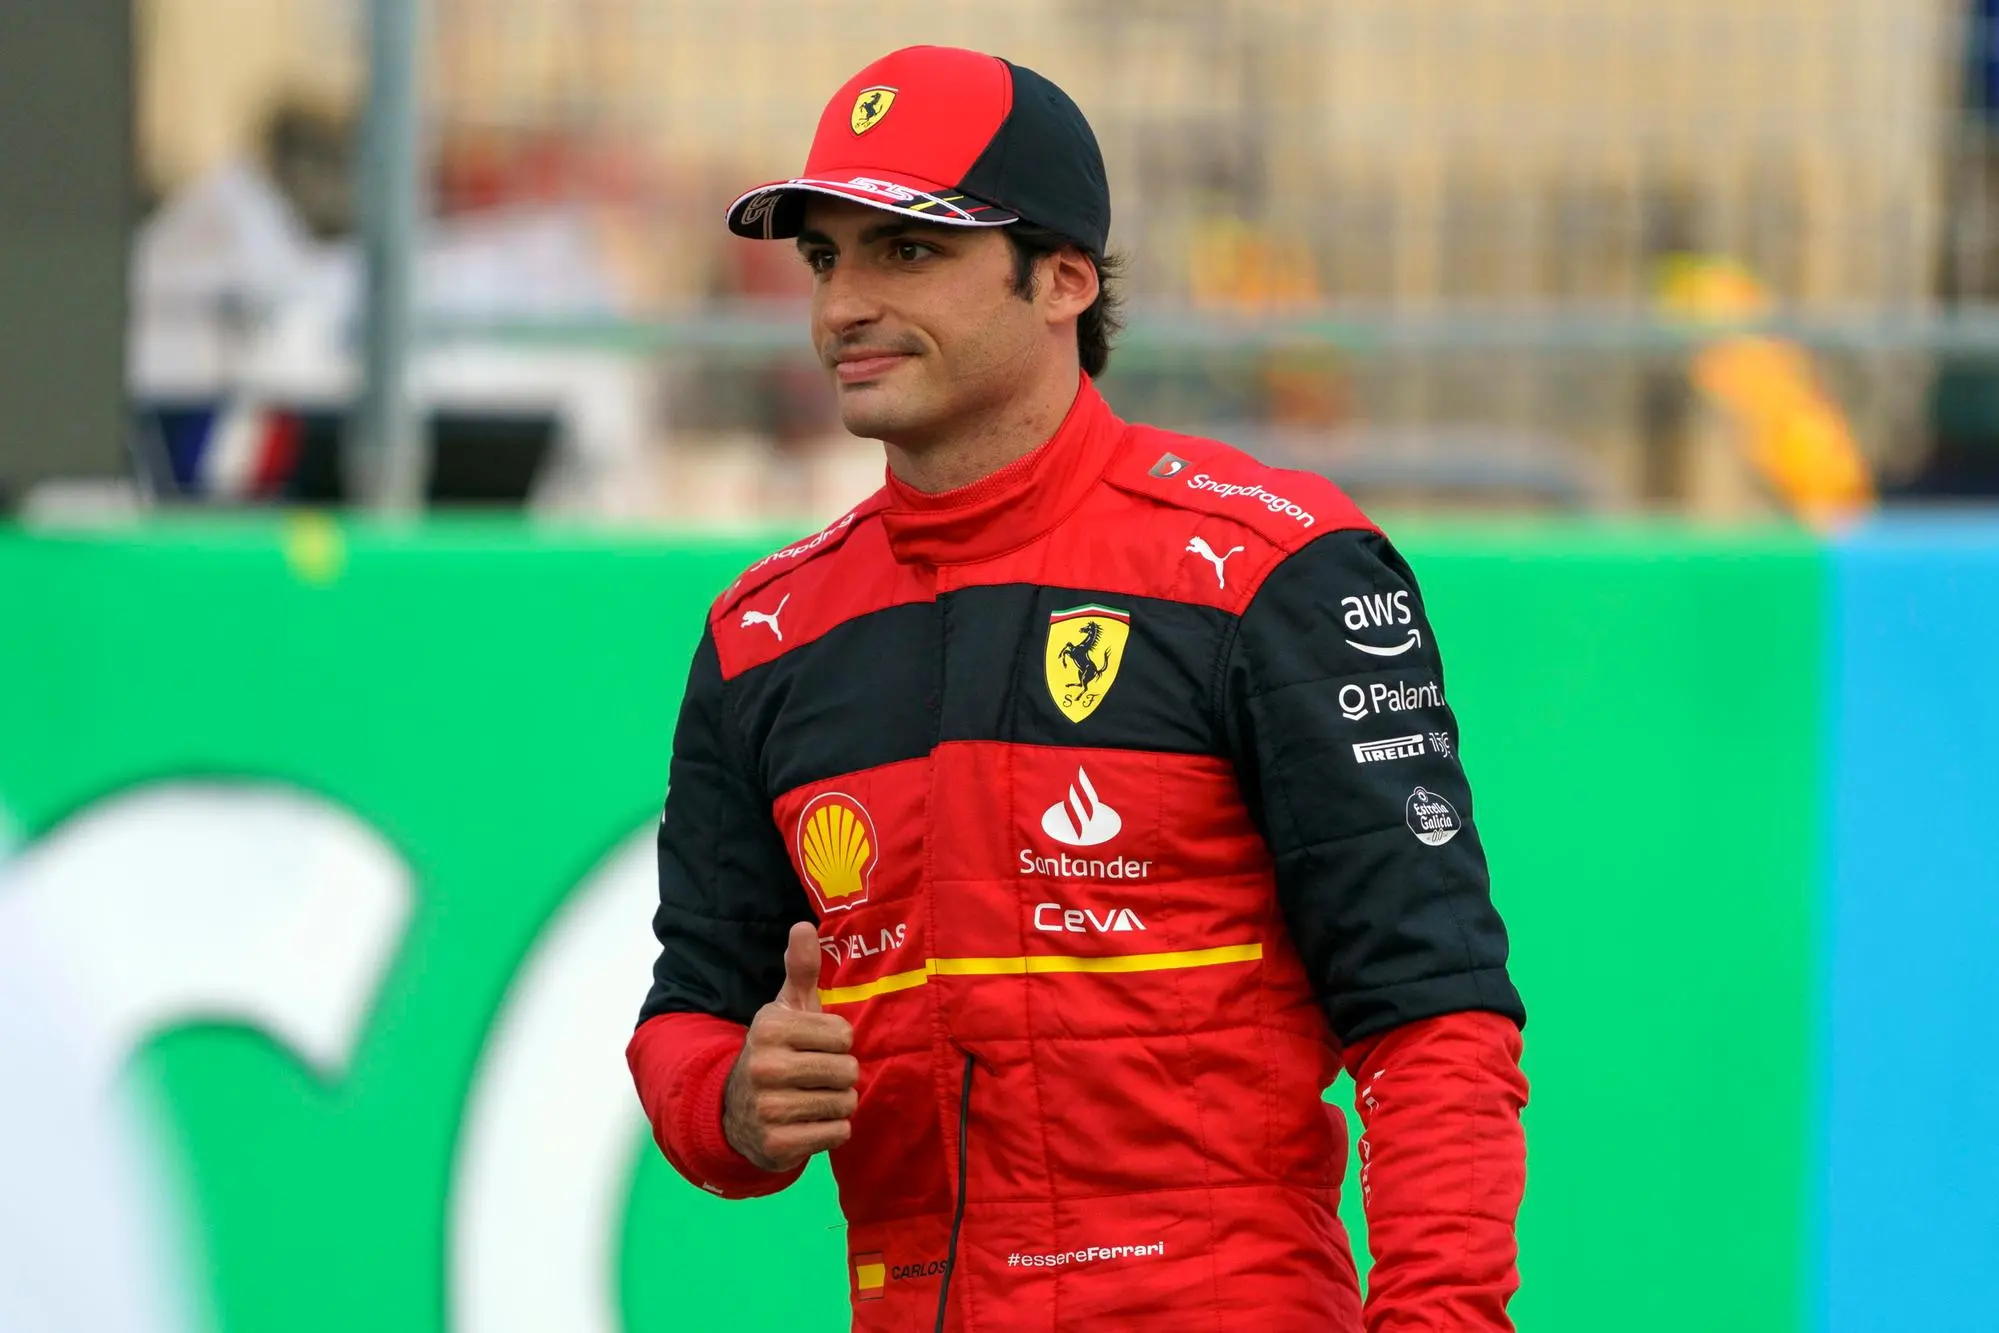 epa10259855 Spanish Formula One driver Carlos Sainz Jr. of Scuderia Ferrari poses for a photo after winning pole position for the Formula One Grand Prix of the US at the Circuit of The Americas in Austin, Texas, USA, 22 October 2022. The Formula One Grand Prix of the USA takes place on 23 October 2022. EPA/GREG NASH